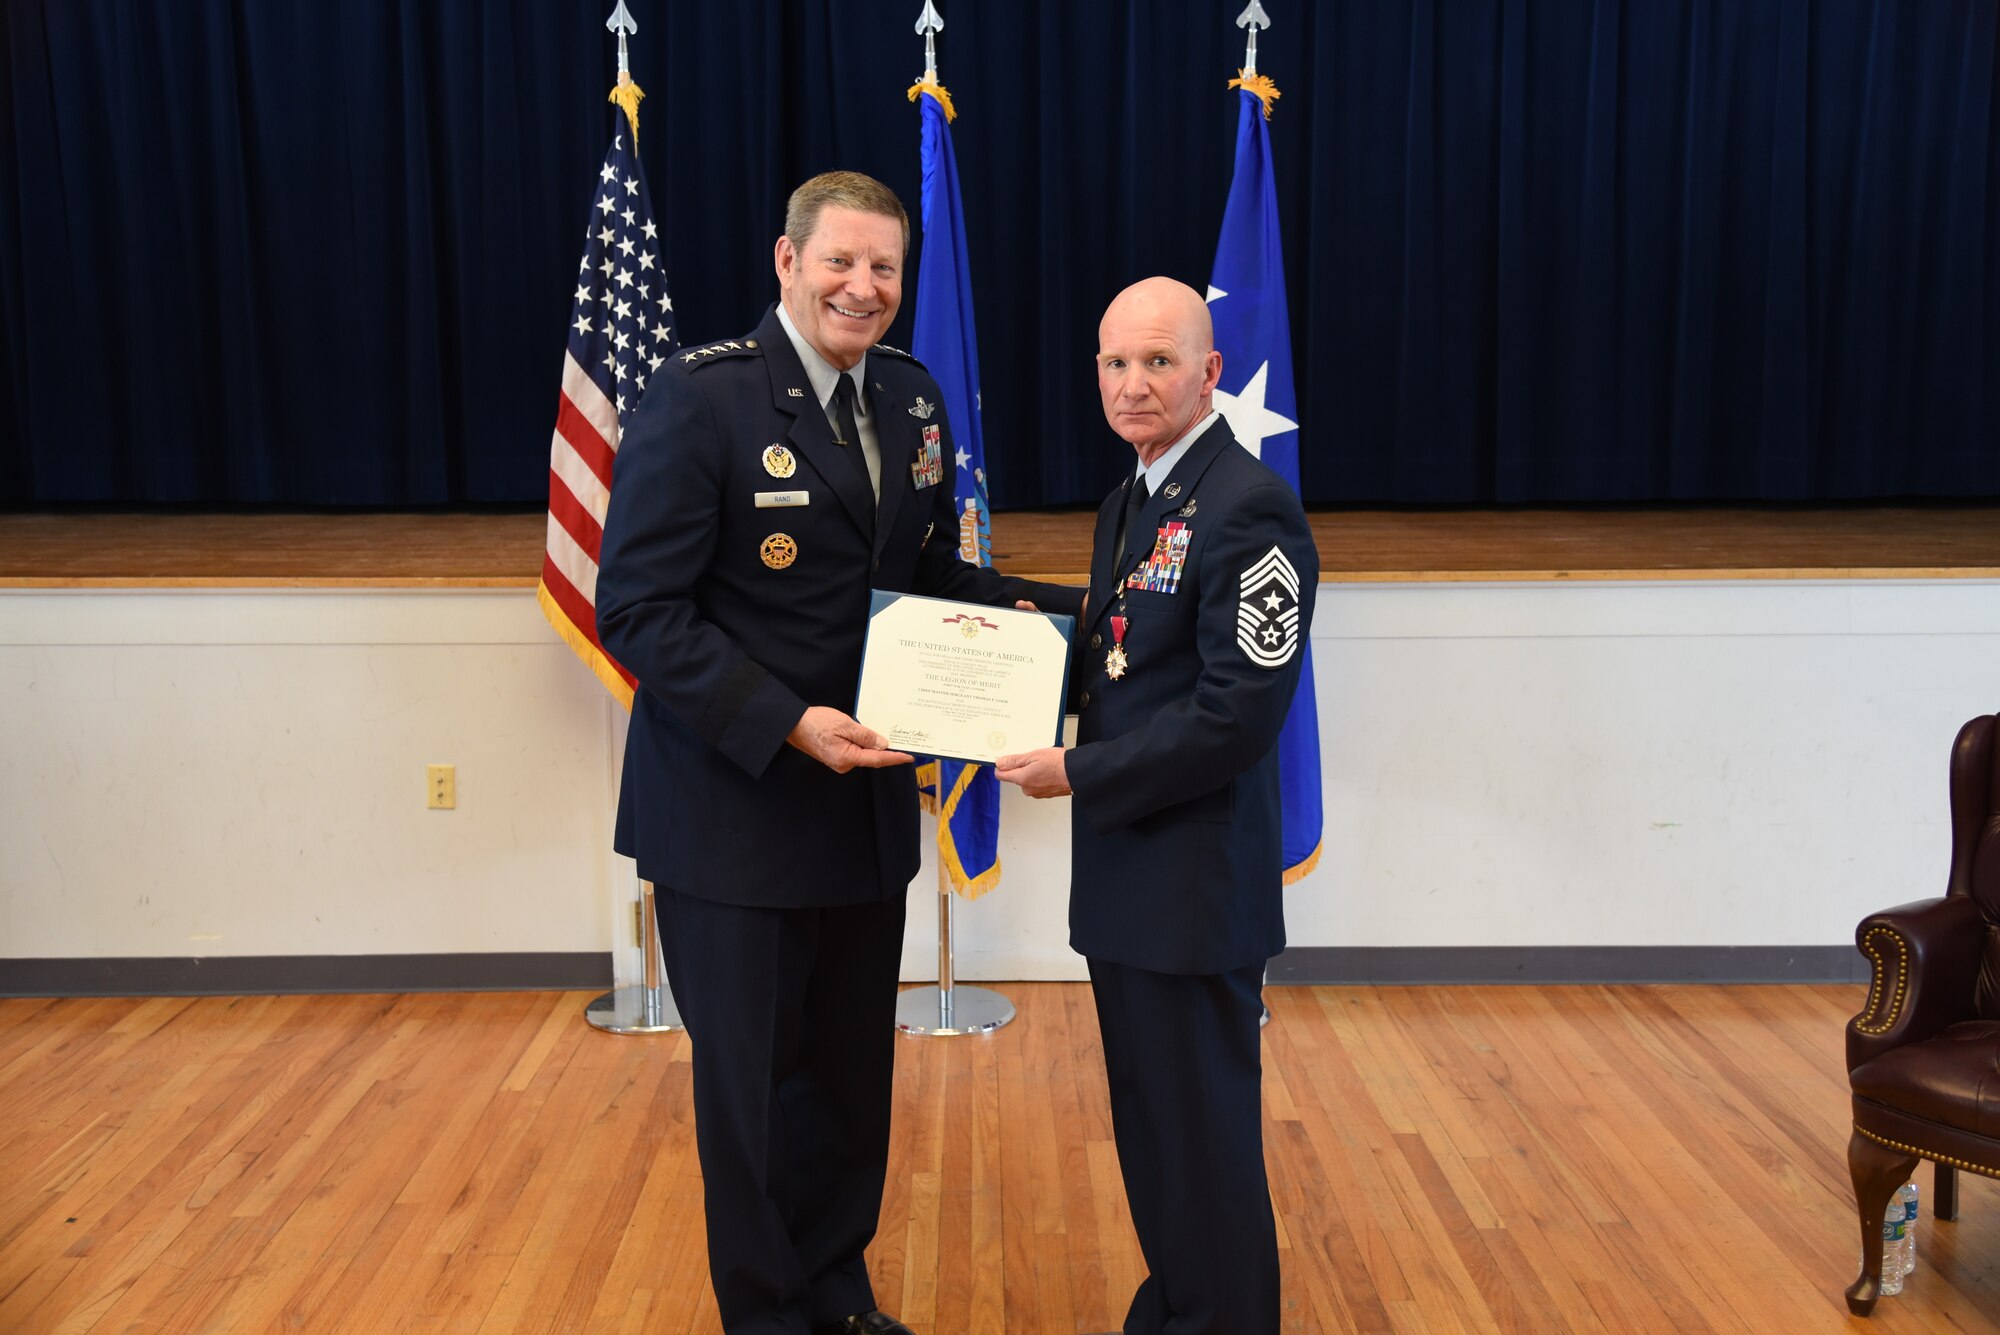 Retired Gen. Robin Rand presents a certificate to Chief Master Sgt. Thomas F. Good, 20th Air Force command chief, during Chief Good's retirement ceremony March 5, 2019, at F. E. Warren Air Force Base. Chief Good retired as the 20th Air Force command chief in the presence of his wife, children and friends. (U.S. Air Force photo by Senior Airman Nicole Reed)